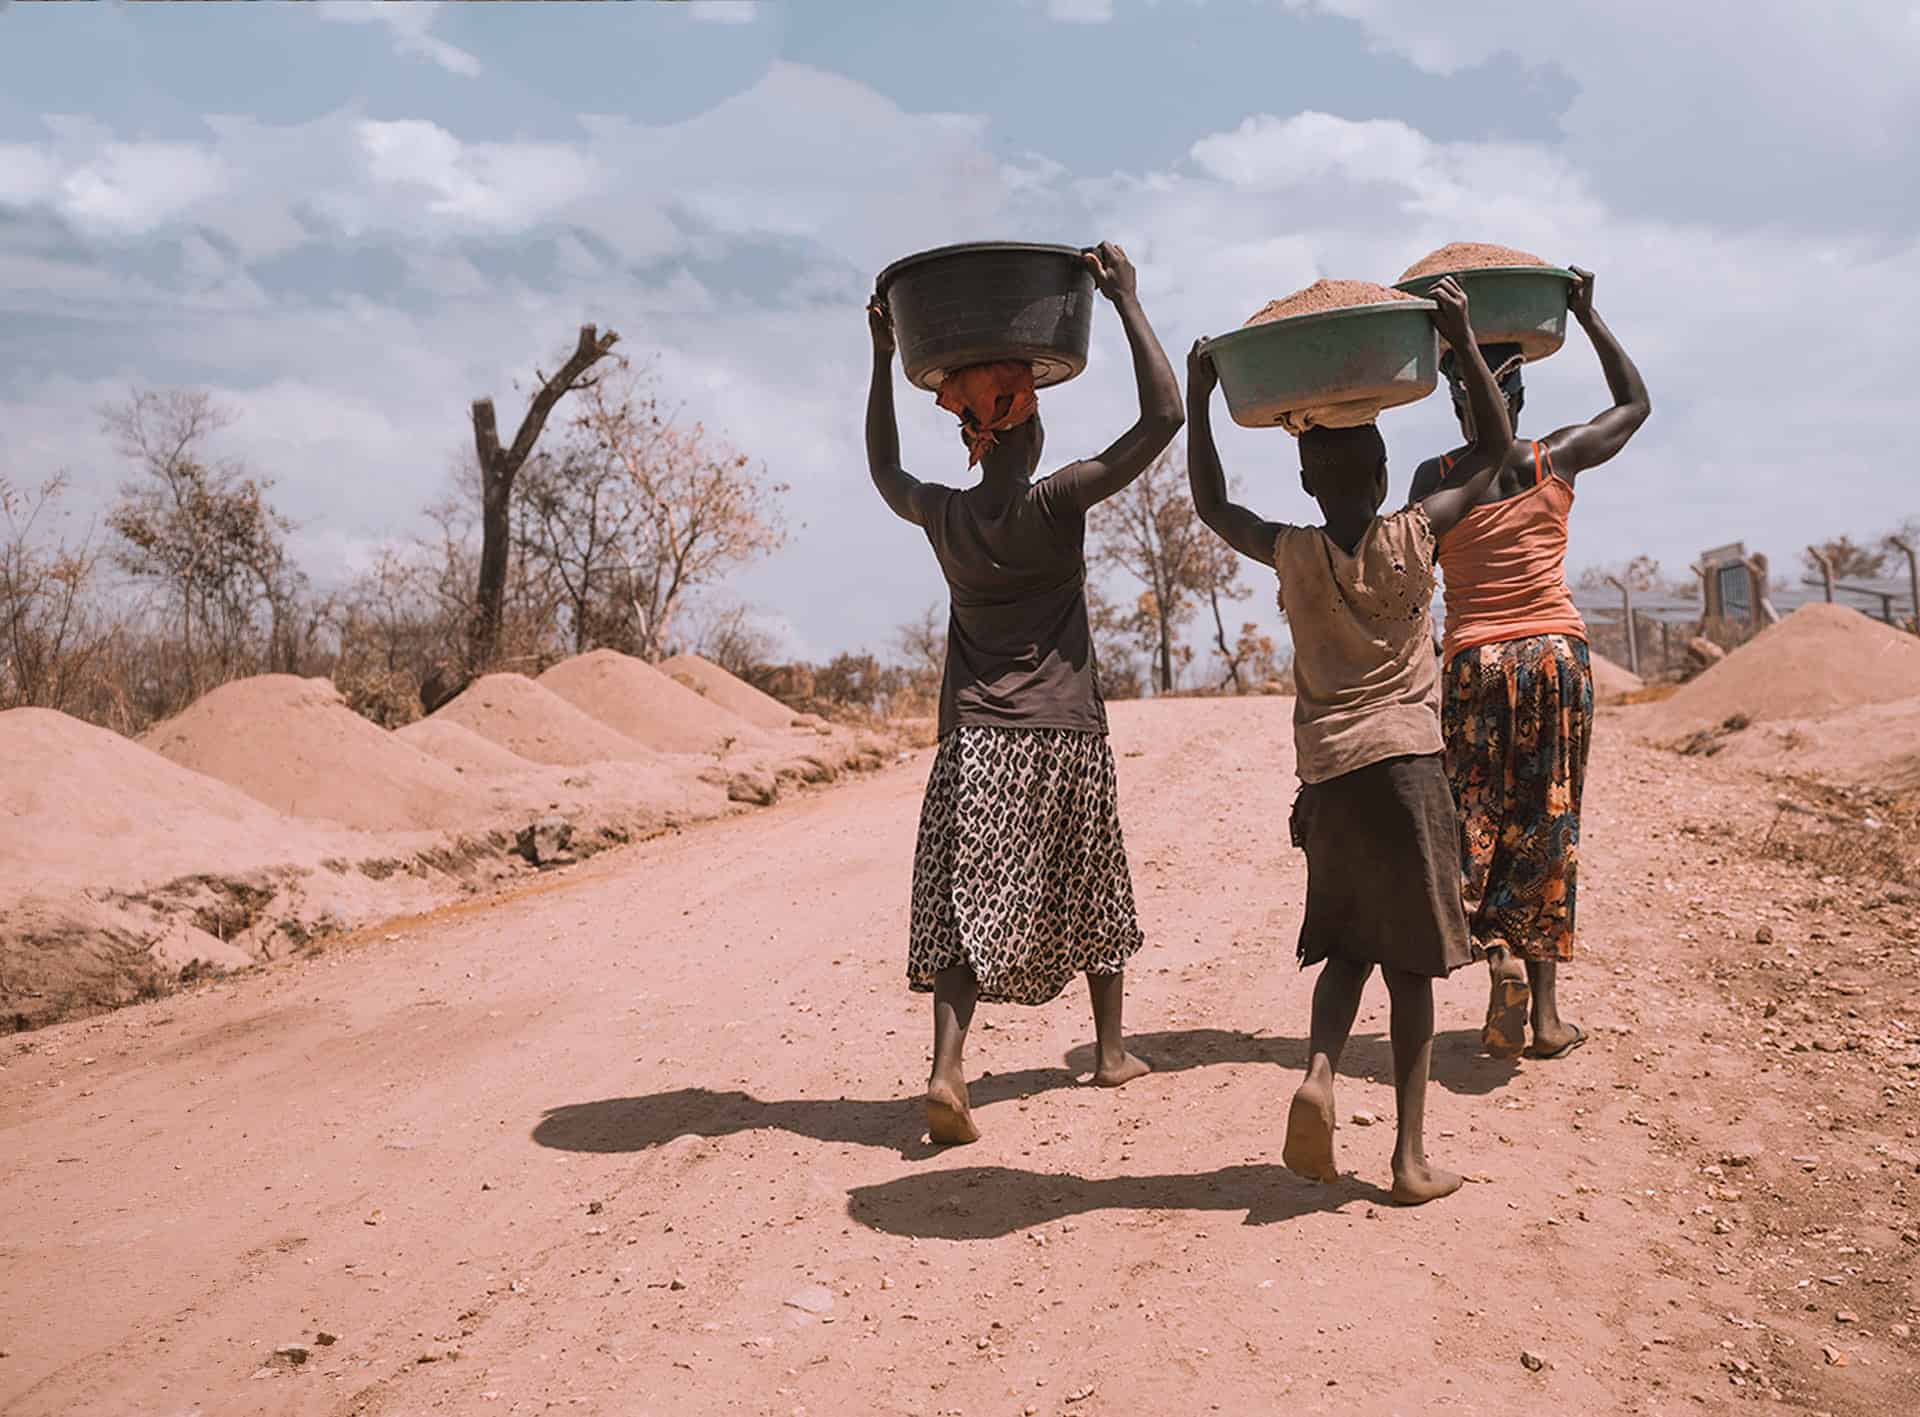 Three individuals carrying basins on their heads walking along a dirt road in a beautiful town.